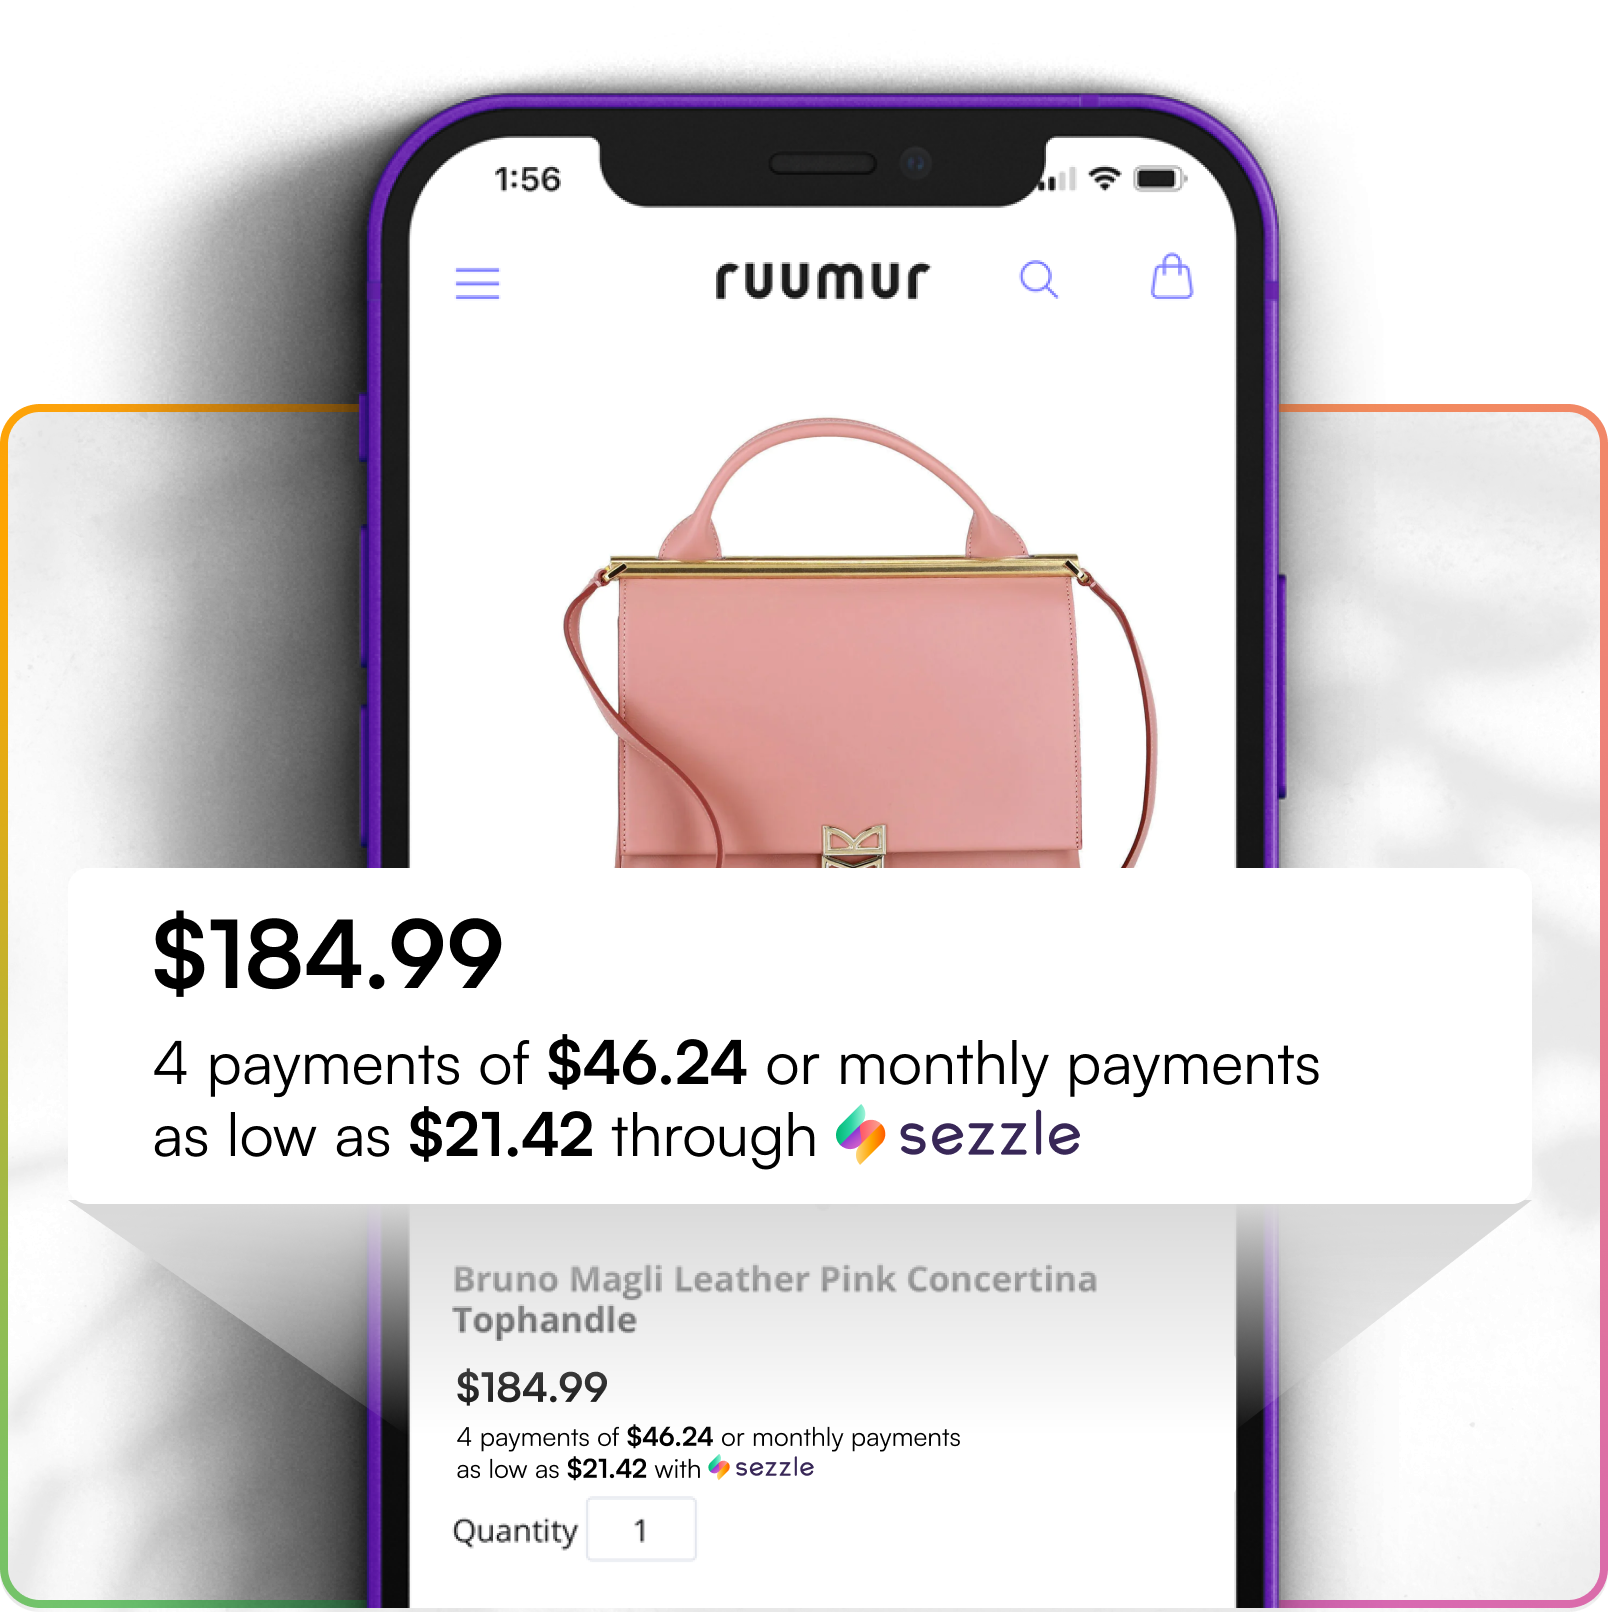 Buy Your Dream Bag Now, Pay Later With Affirm - StockX News